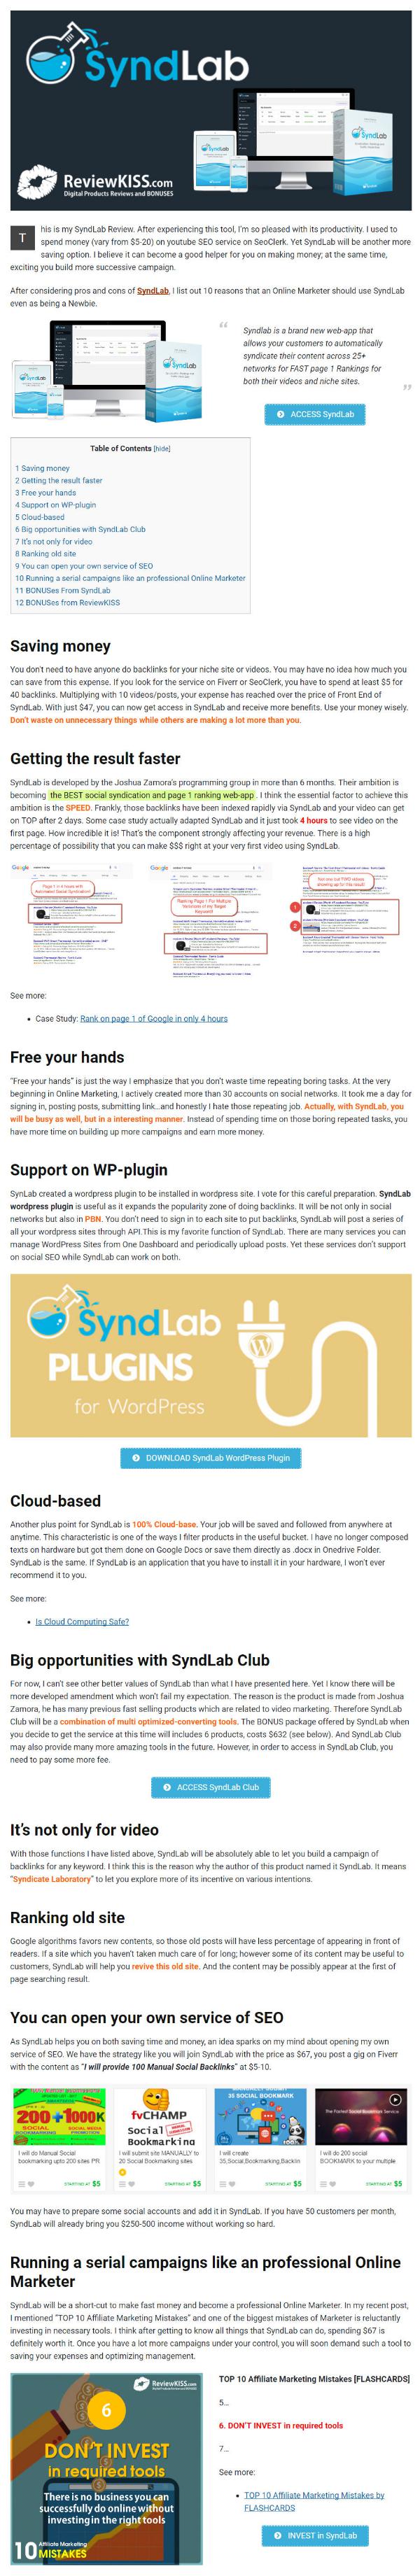 SyndLab Review and 10 Reasons Online Marketer Should Use SyndLab by RevieKISS.com